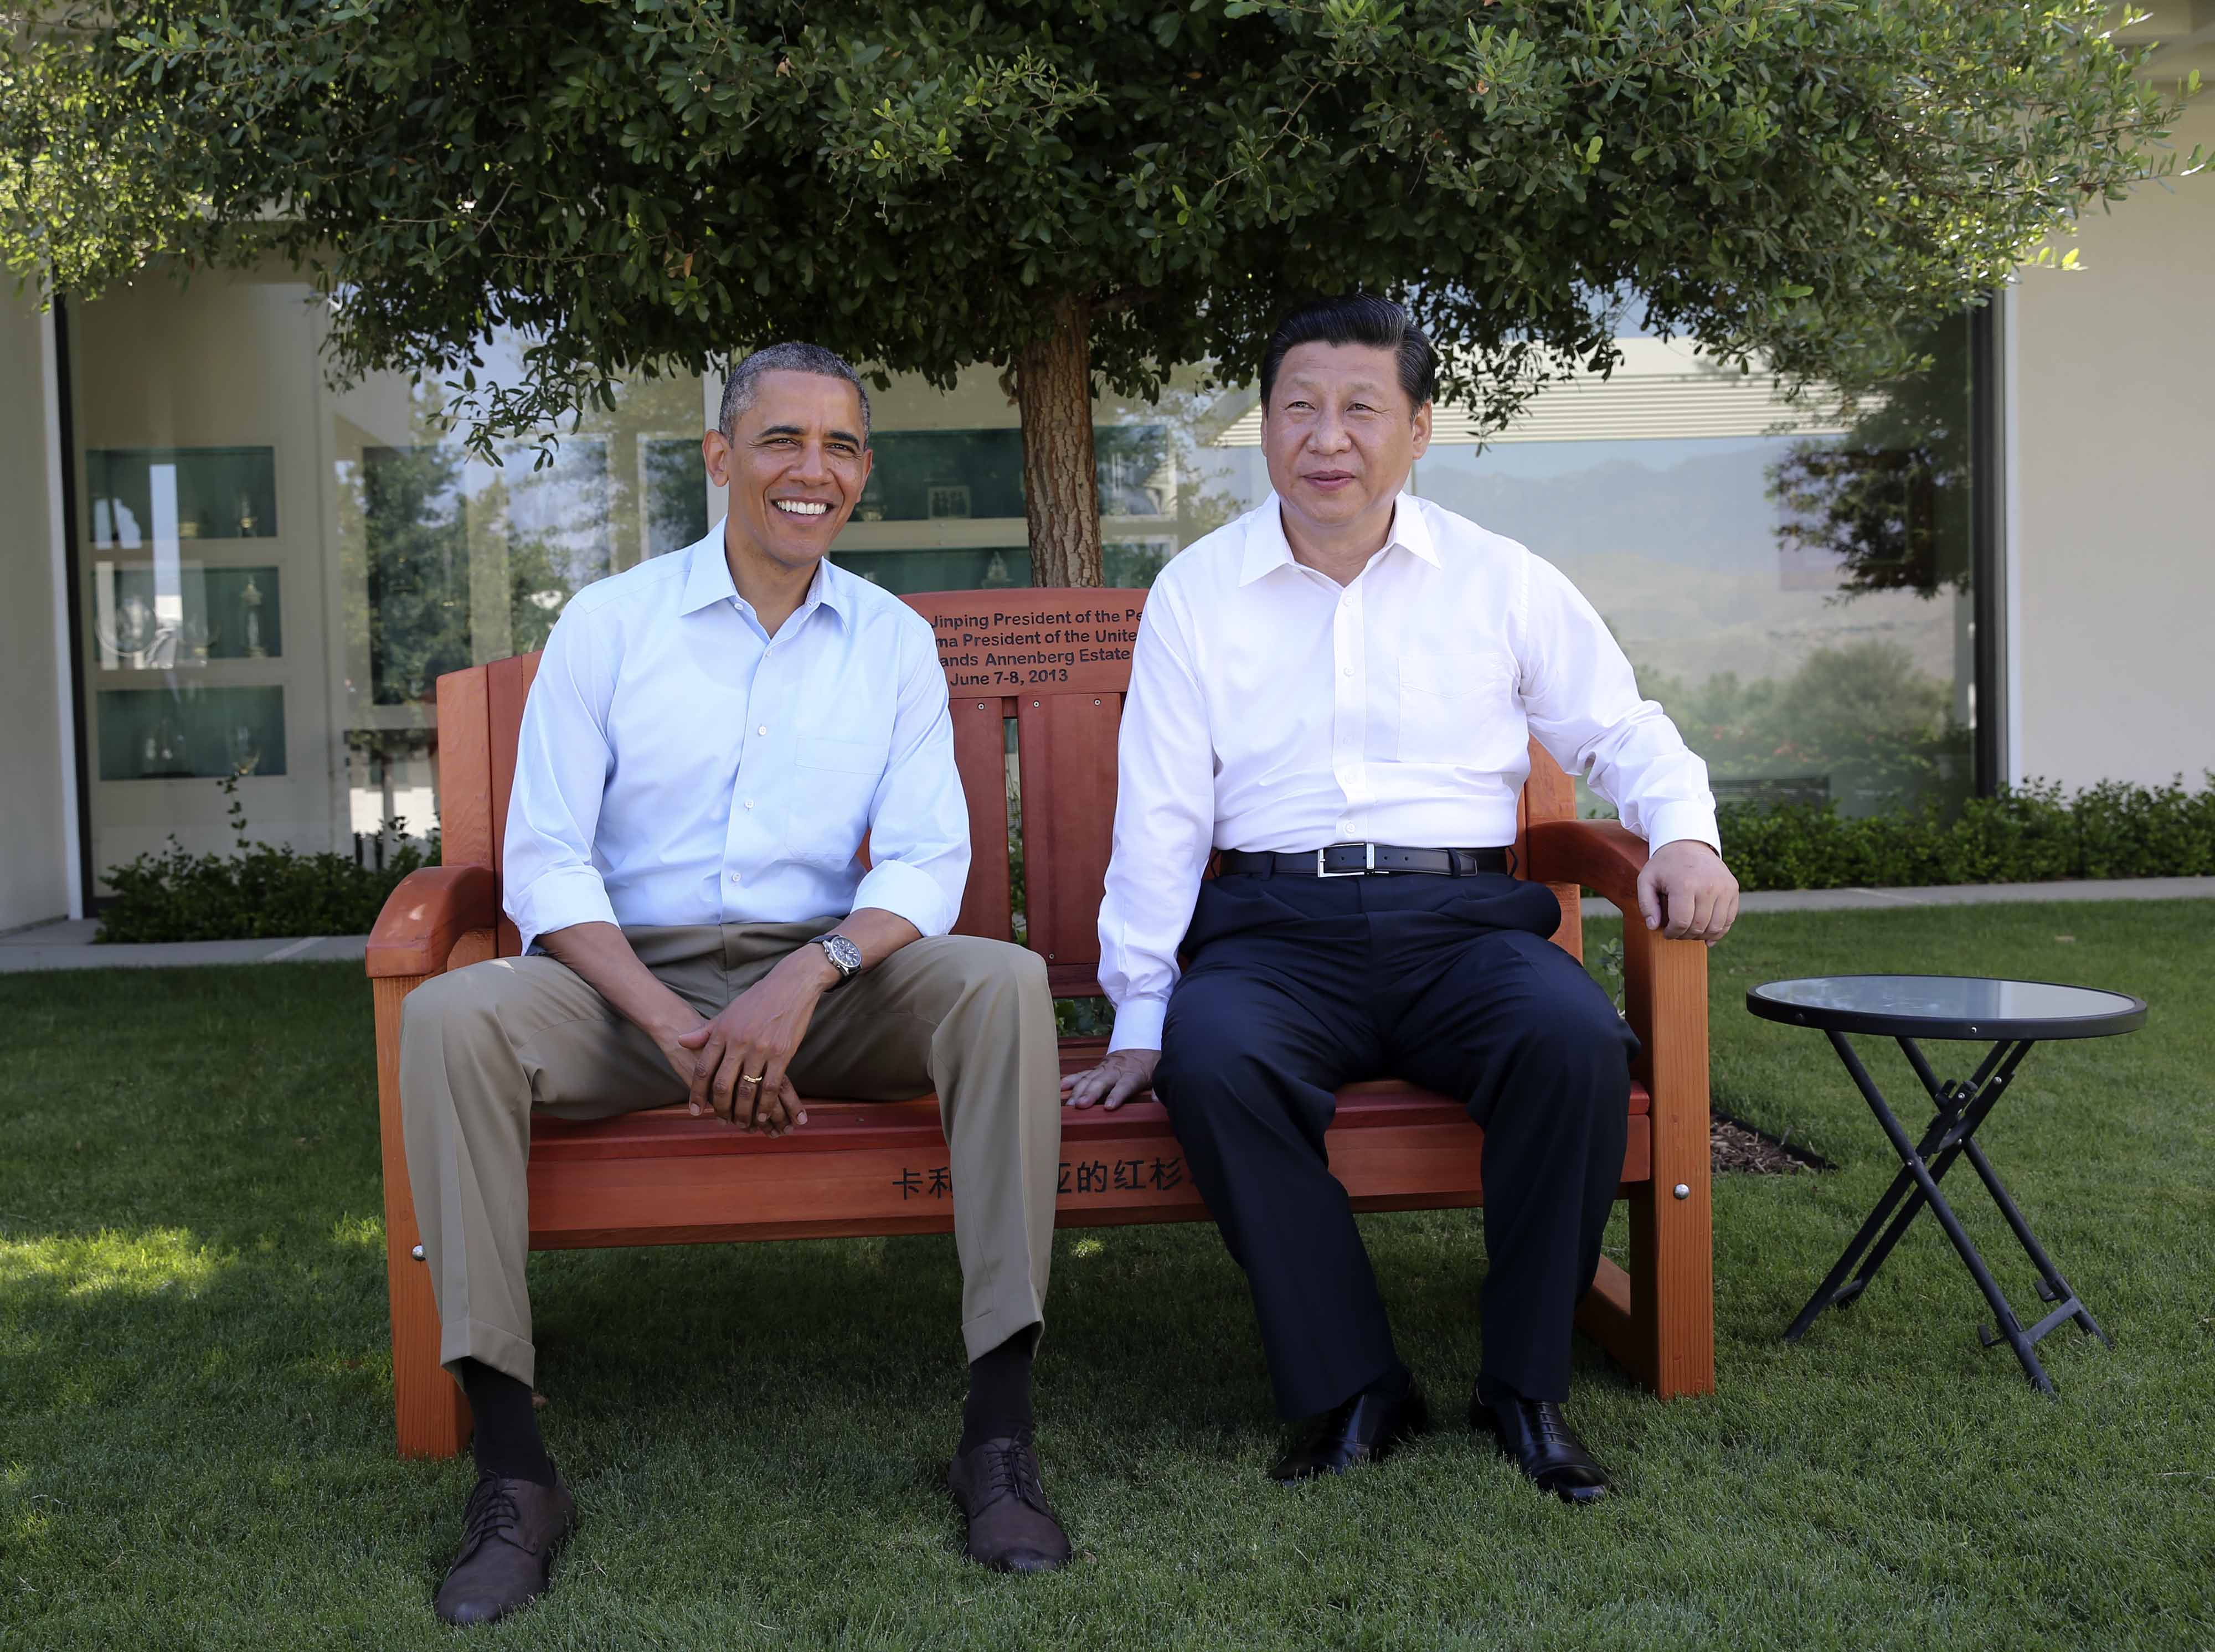 Barack Obama presents Xi Jinping with a bench made of California redwood before they head into their meeting at the Annenberg Retreat in June 2013. Photo: Xinhua